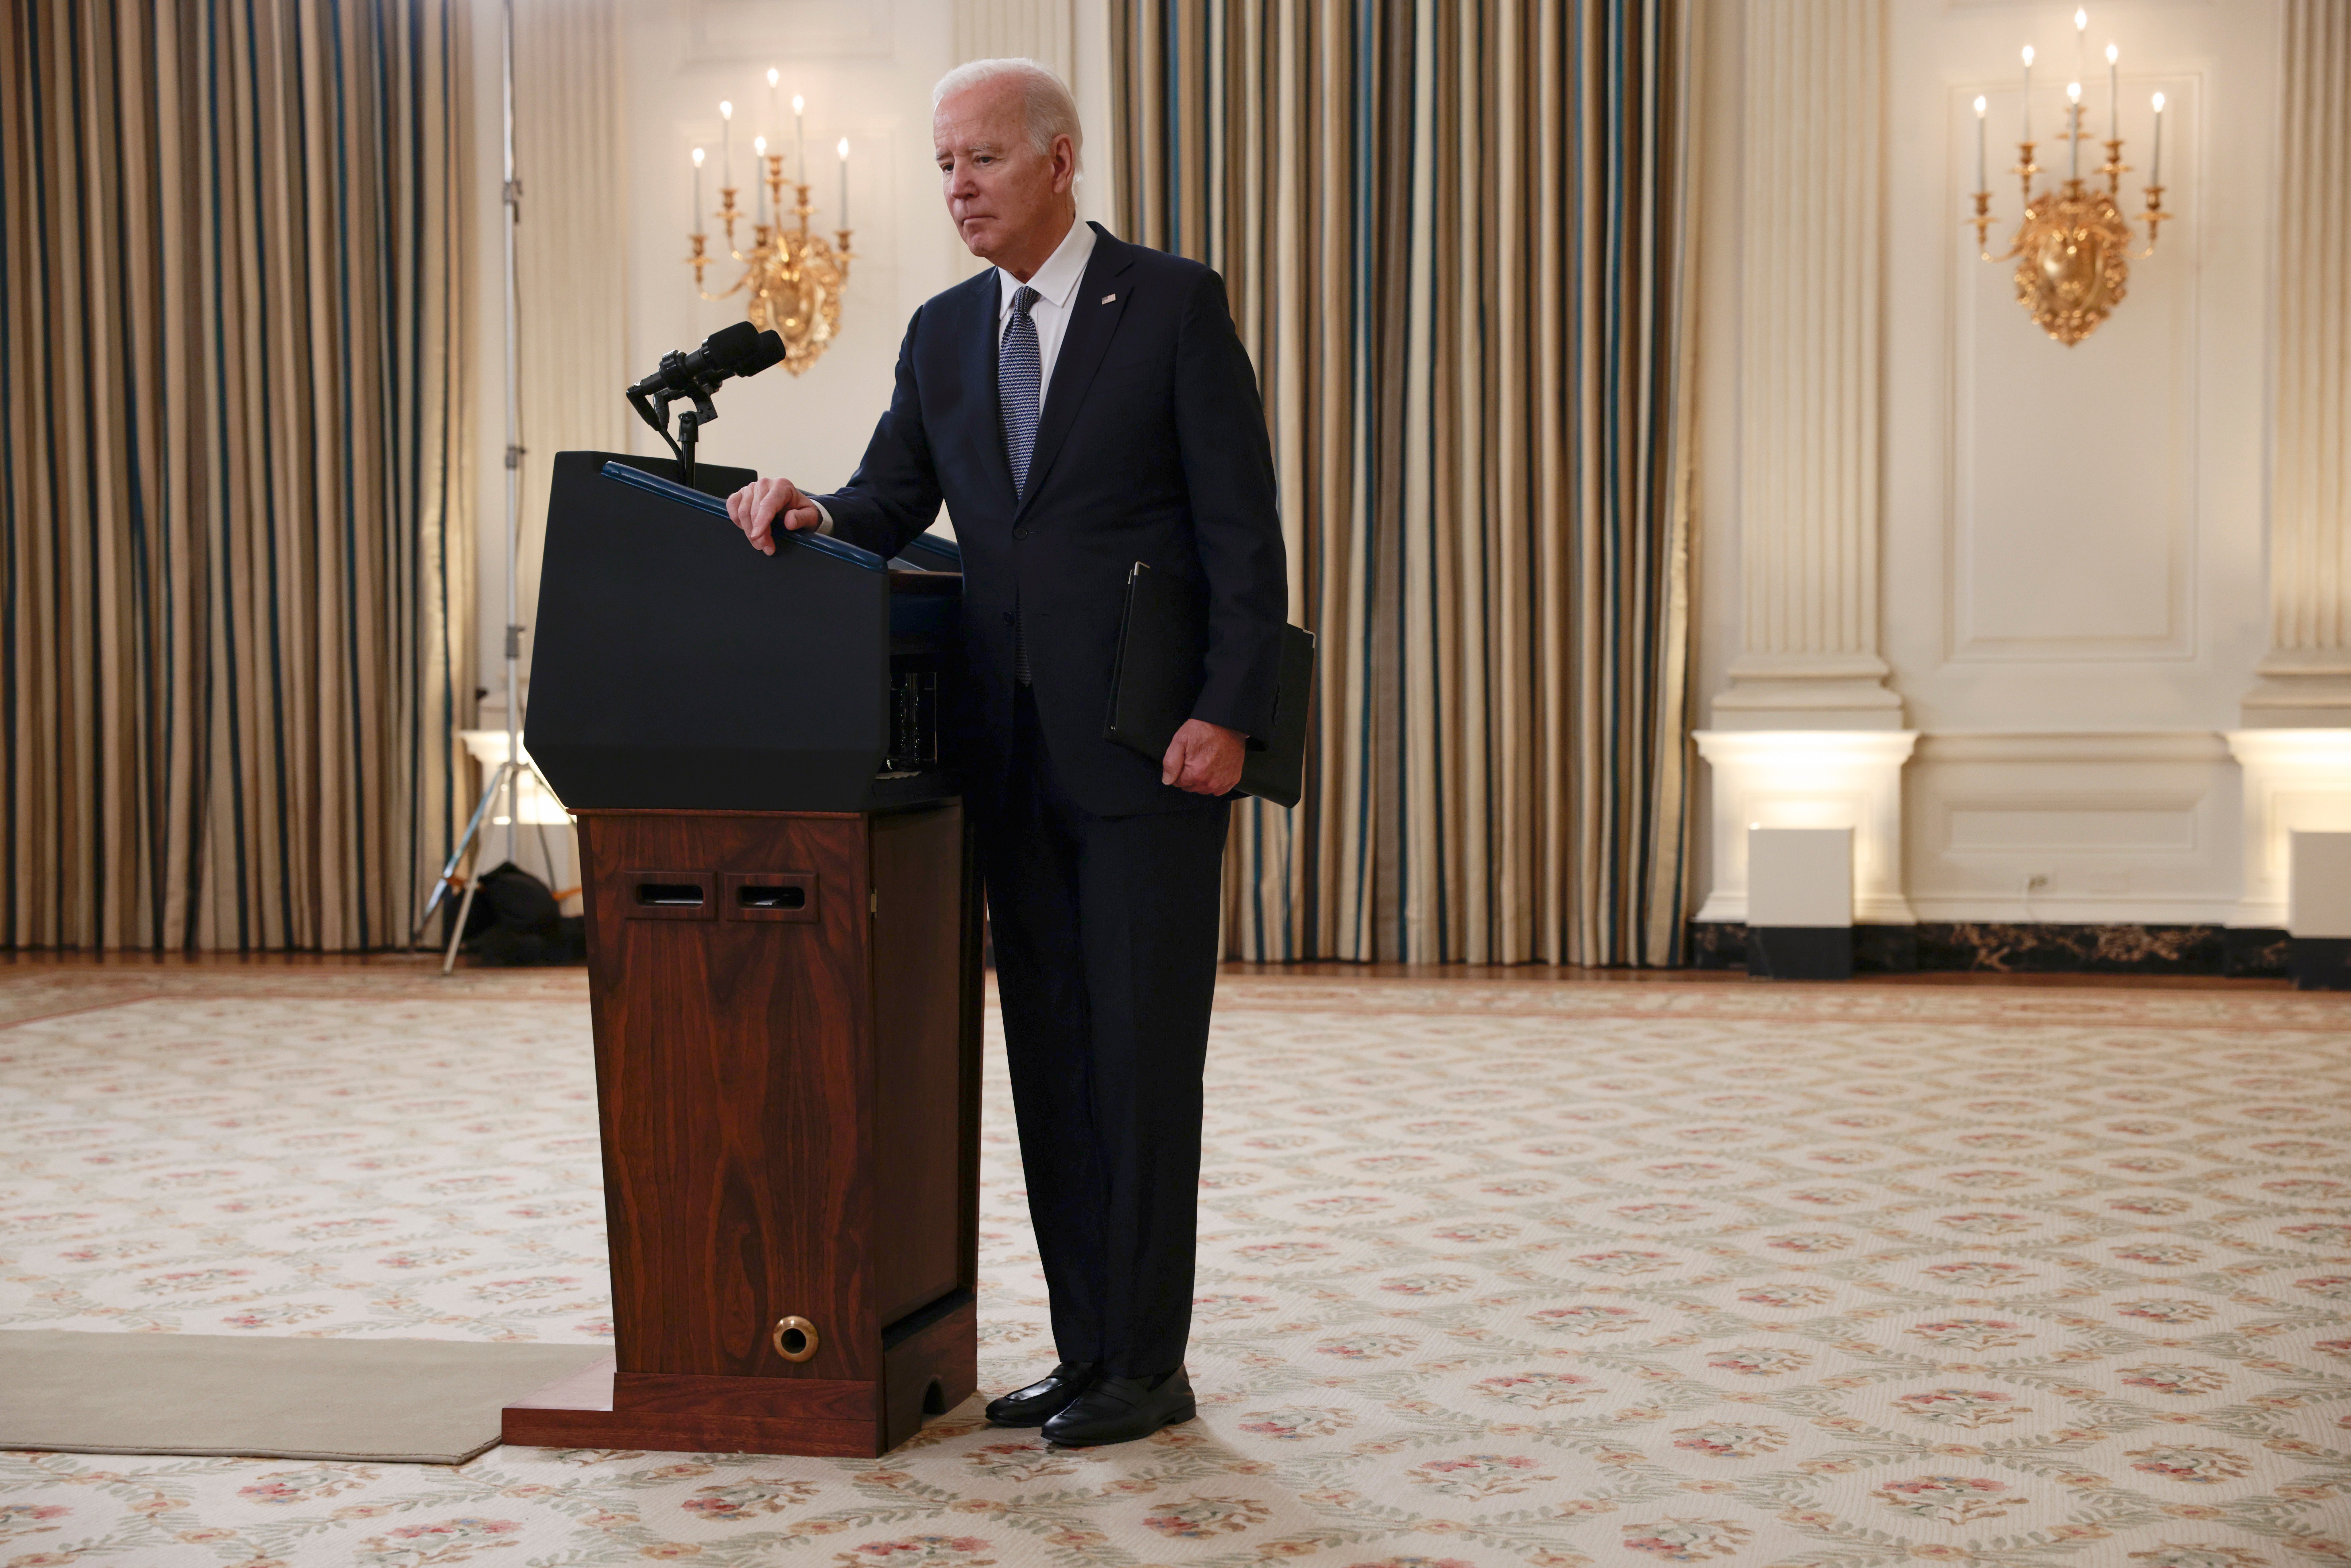 WASHINGTON, DC - DECEMBER 03: U.S. President Joe Biden listens to a reporter's question after giving remarks on the November jobs report in the State Dining Room of the White House on December 03, 2021 in Washington, DC. According to the U.S. Labor Department, the economy added 210,000 jobs in November and the unemployment rate fell to 4.2%. (Photo by Anna Moneymaker/Getty Images)